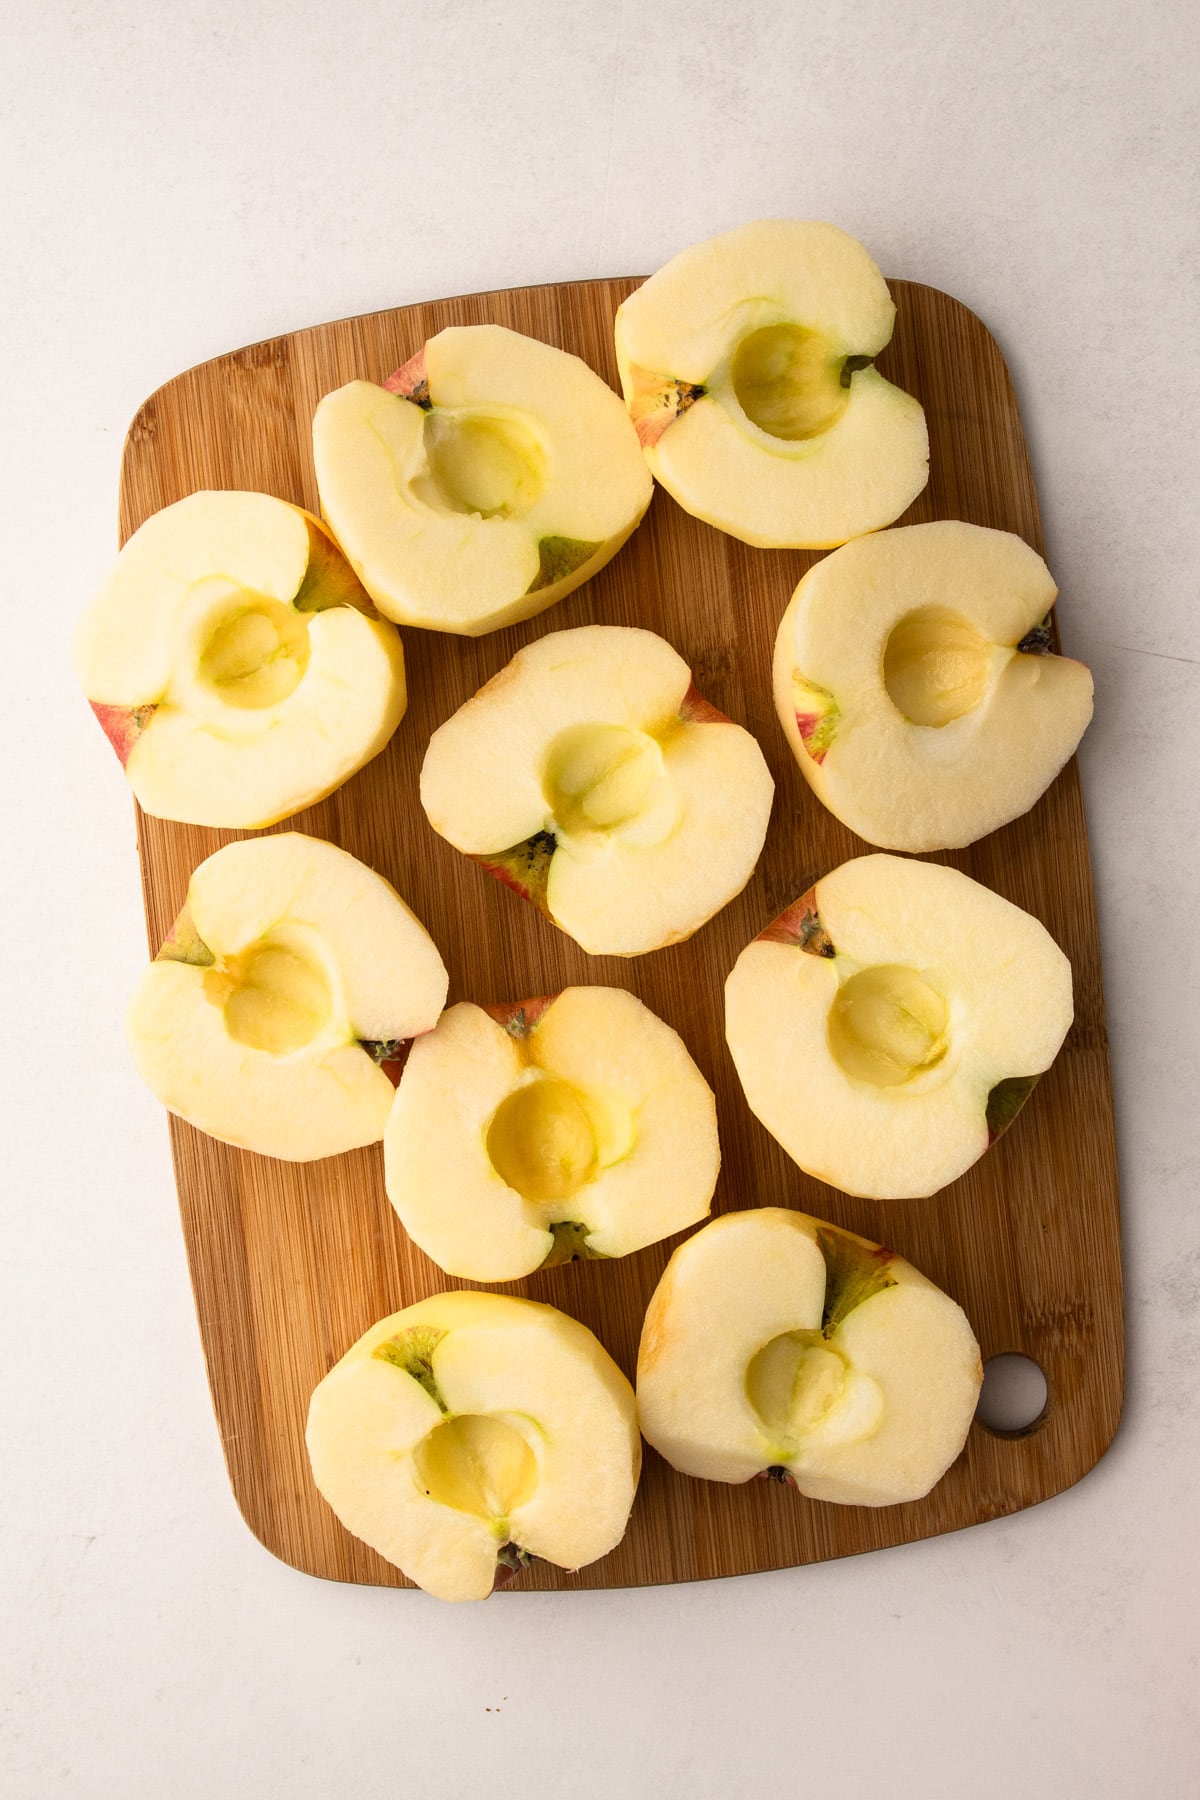 Apples, peeled, cut in half and cored.